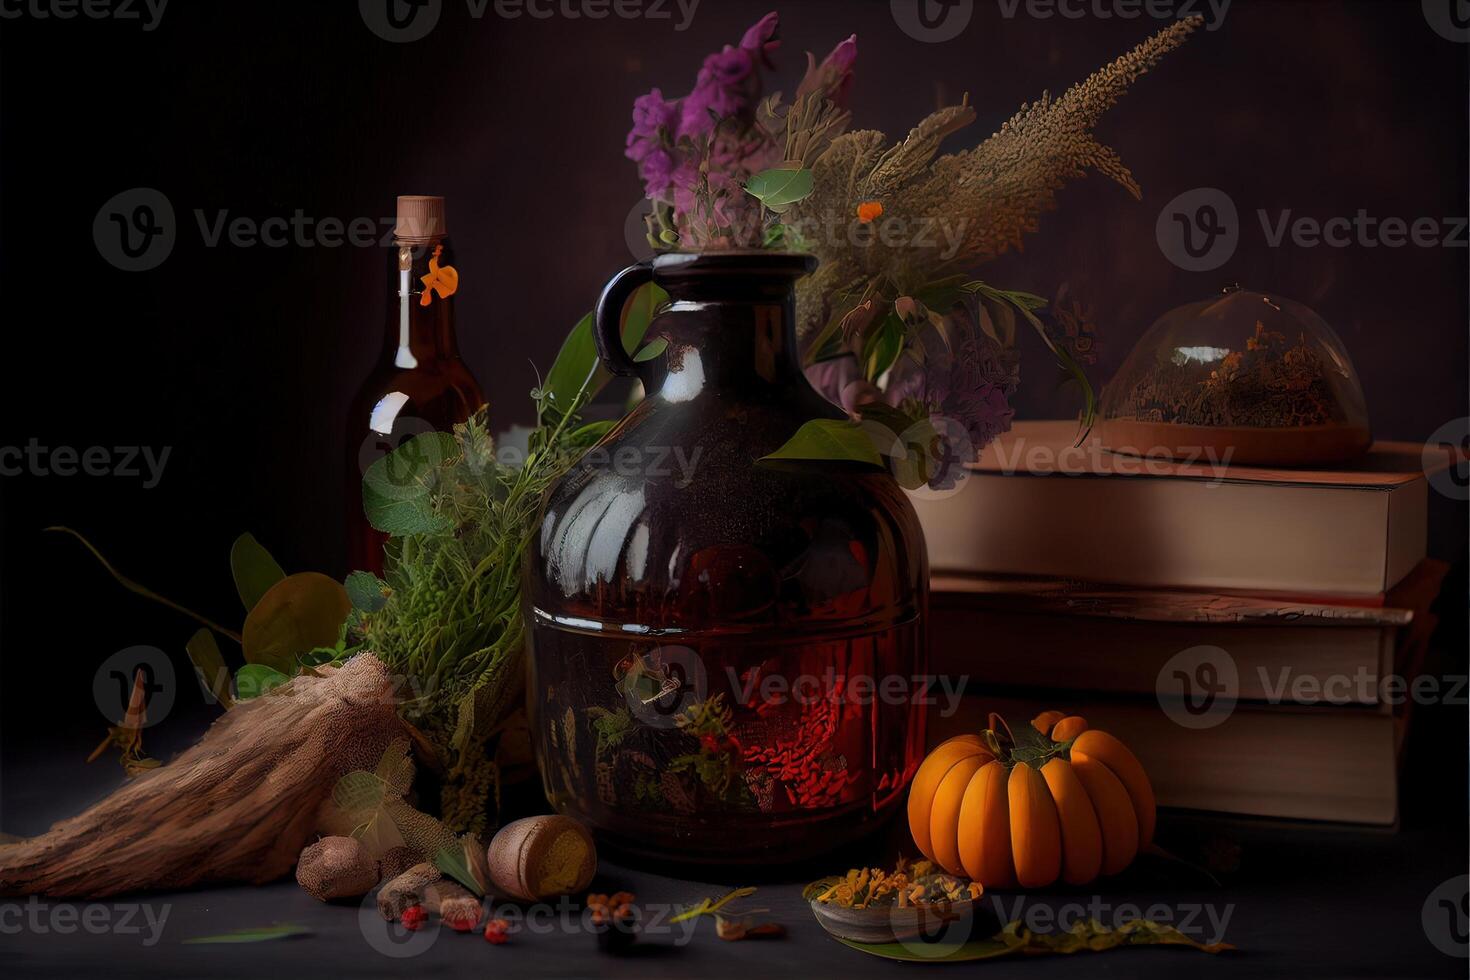 illustration of the ingredients of a flower vase arranged for a witch's cookbook. Herbs, bottles, vials, terracotta mixing pot photo